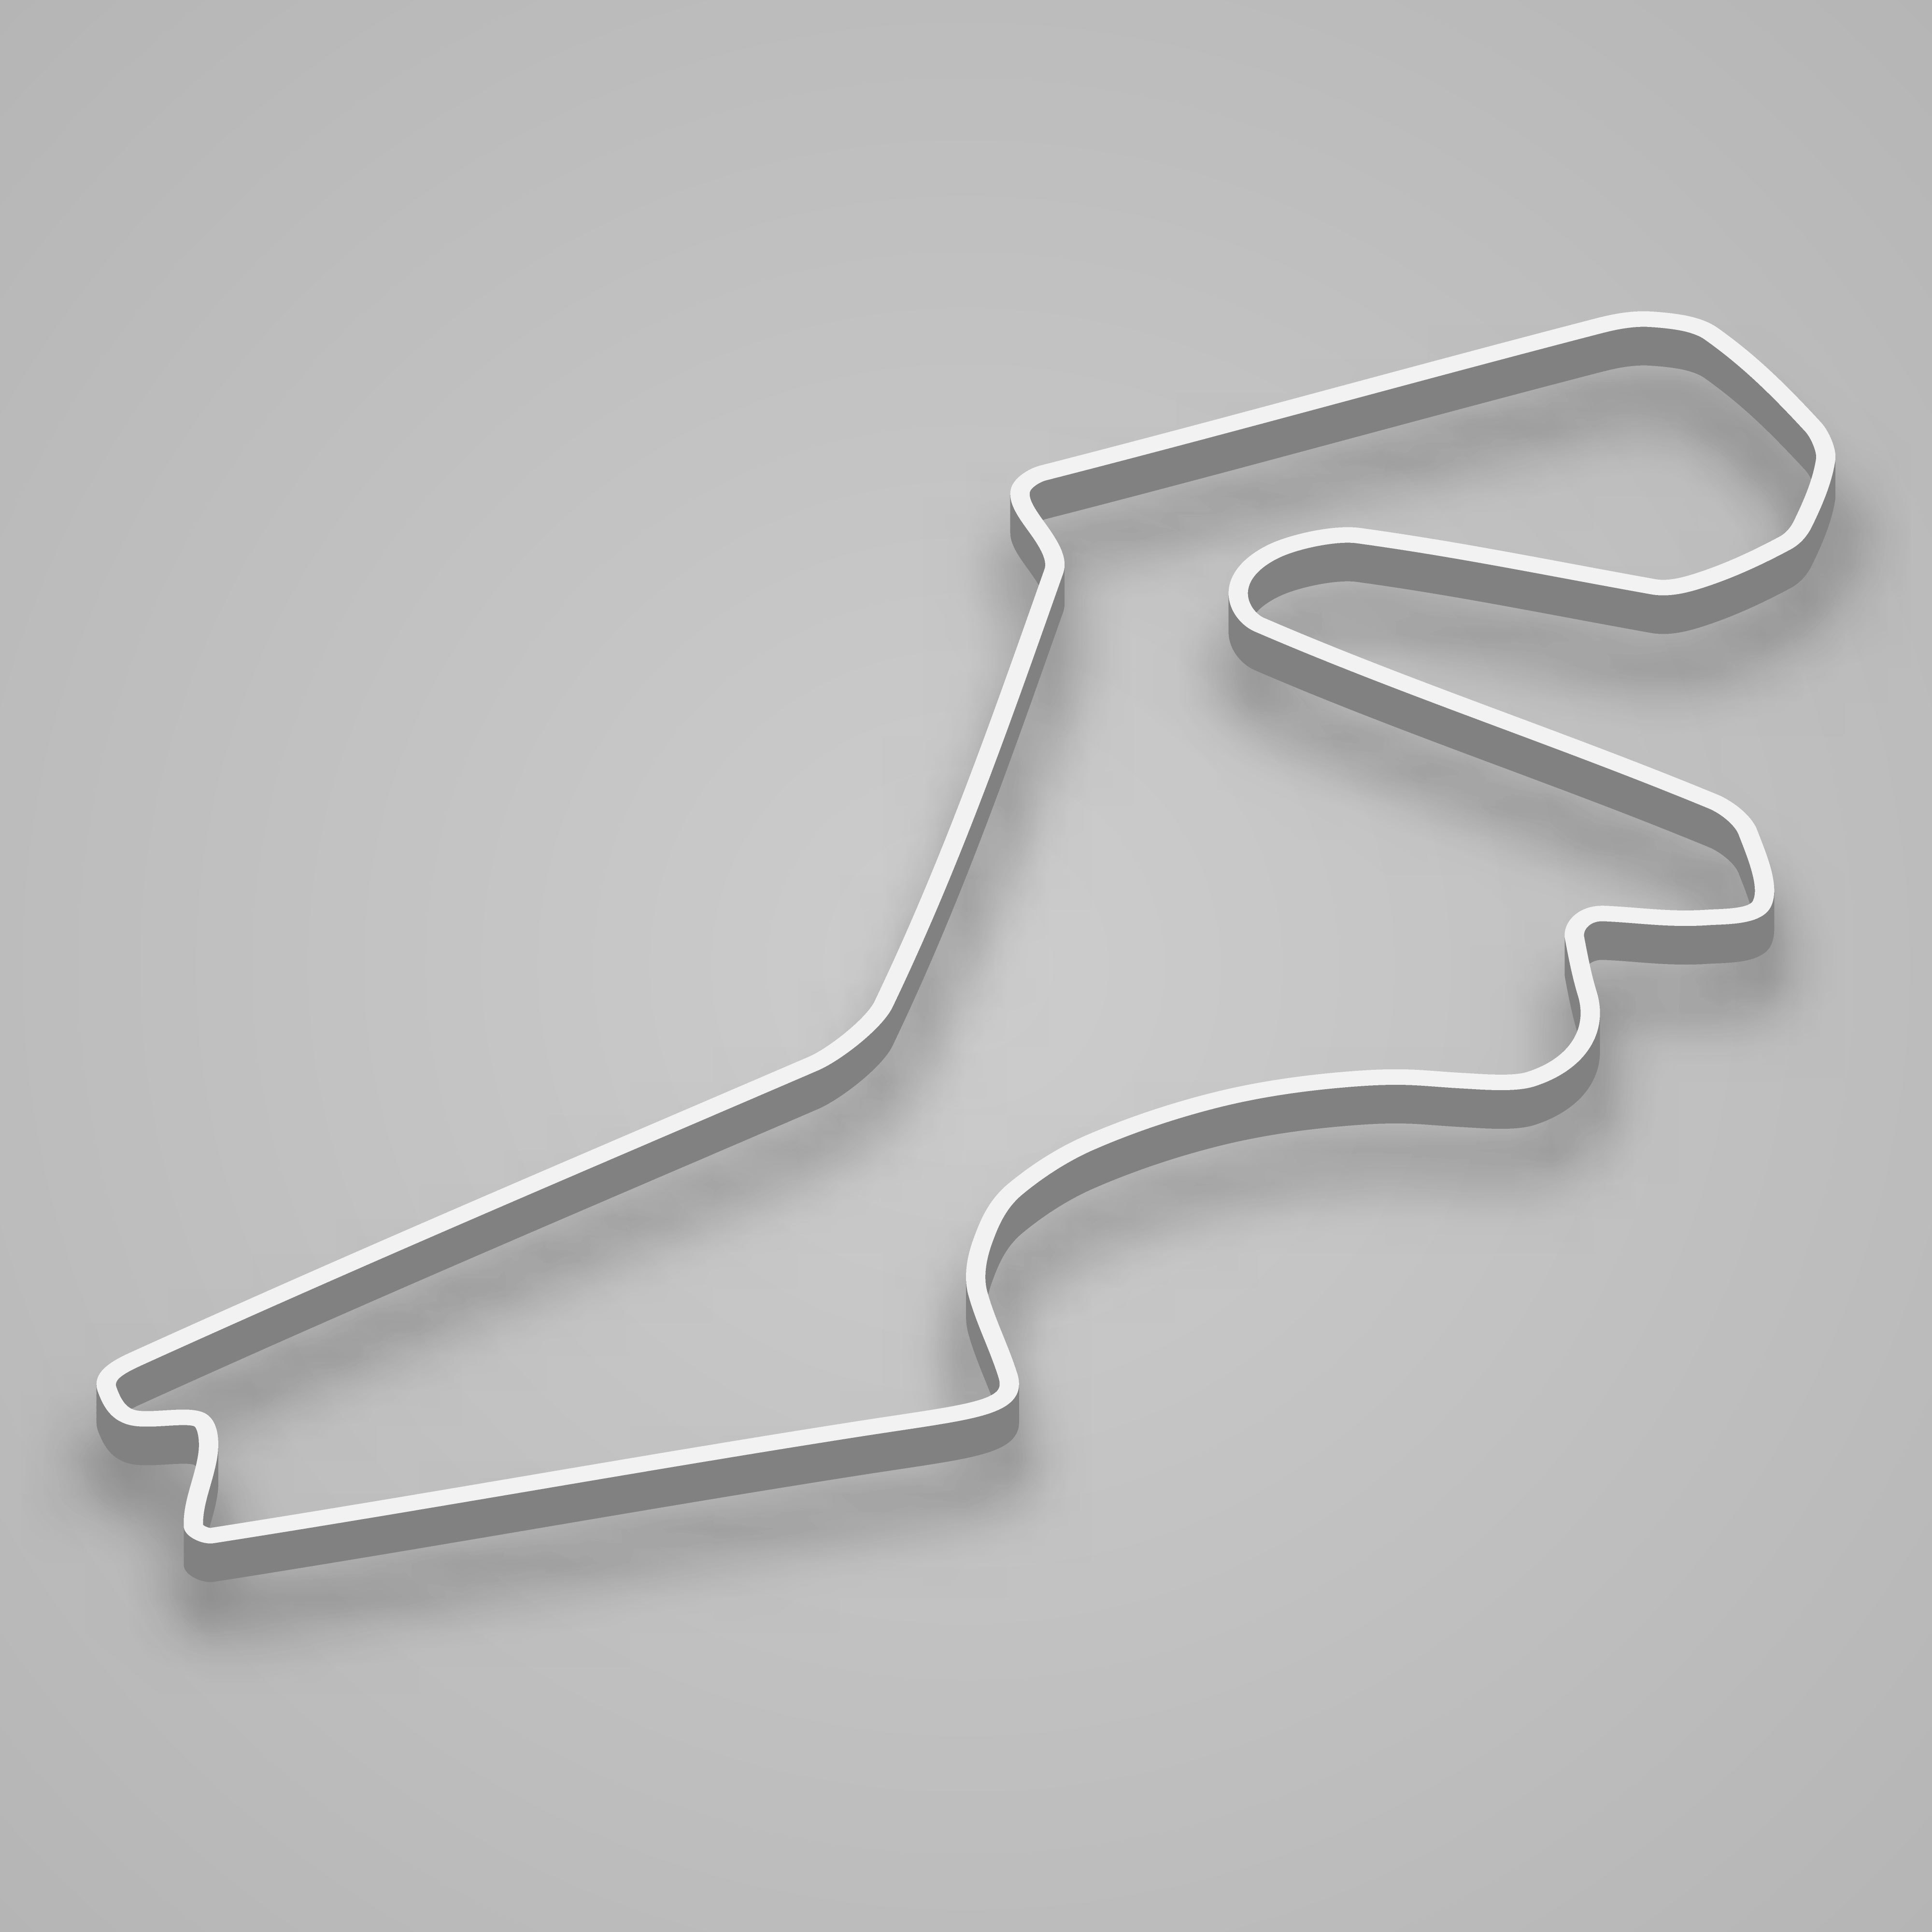 Istanbul Circuit for motorsport and autosport. Turkey Grand prix race track.